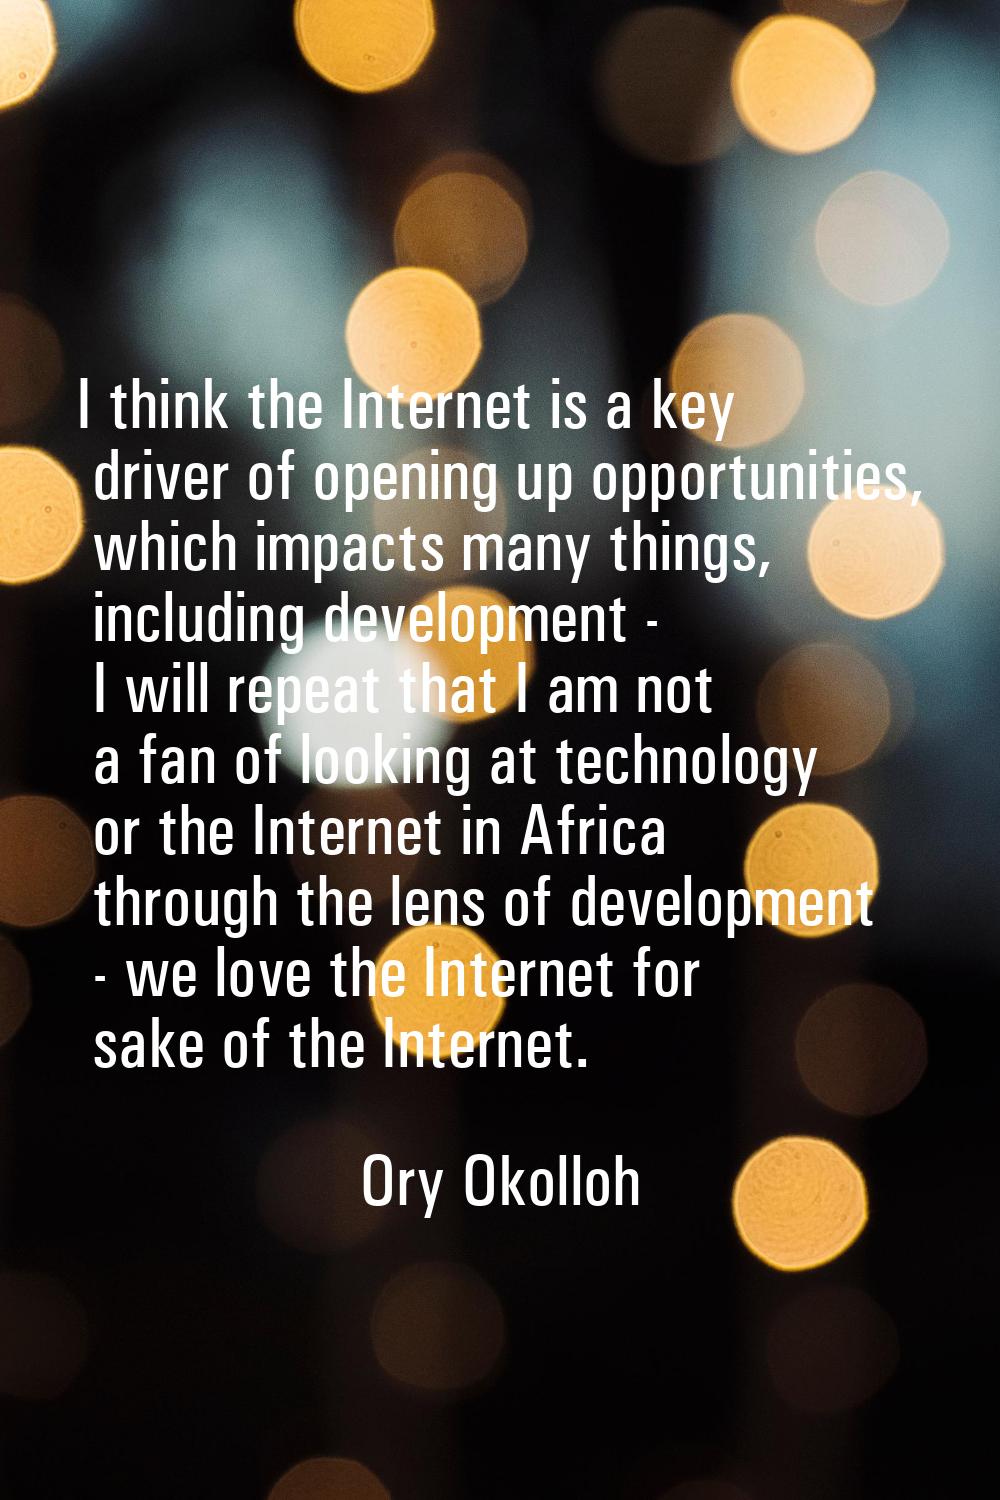 I think the Internet is a key driver of opening up opportunities, which impacts many things, includ